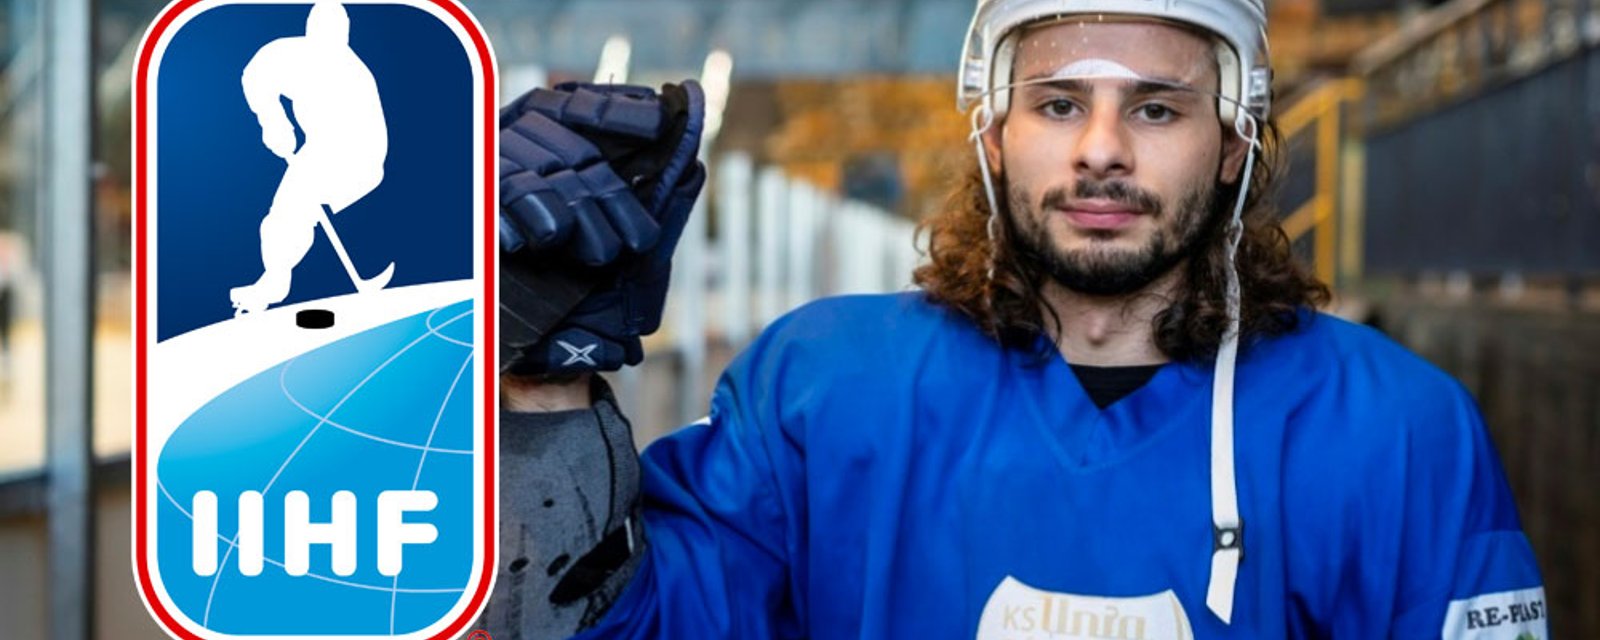 Israel banned from international competition, sue IIHF